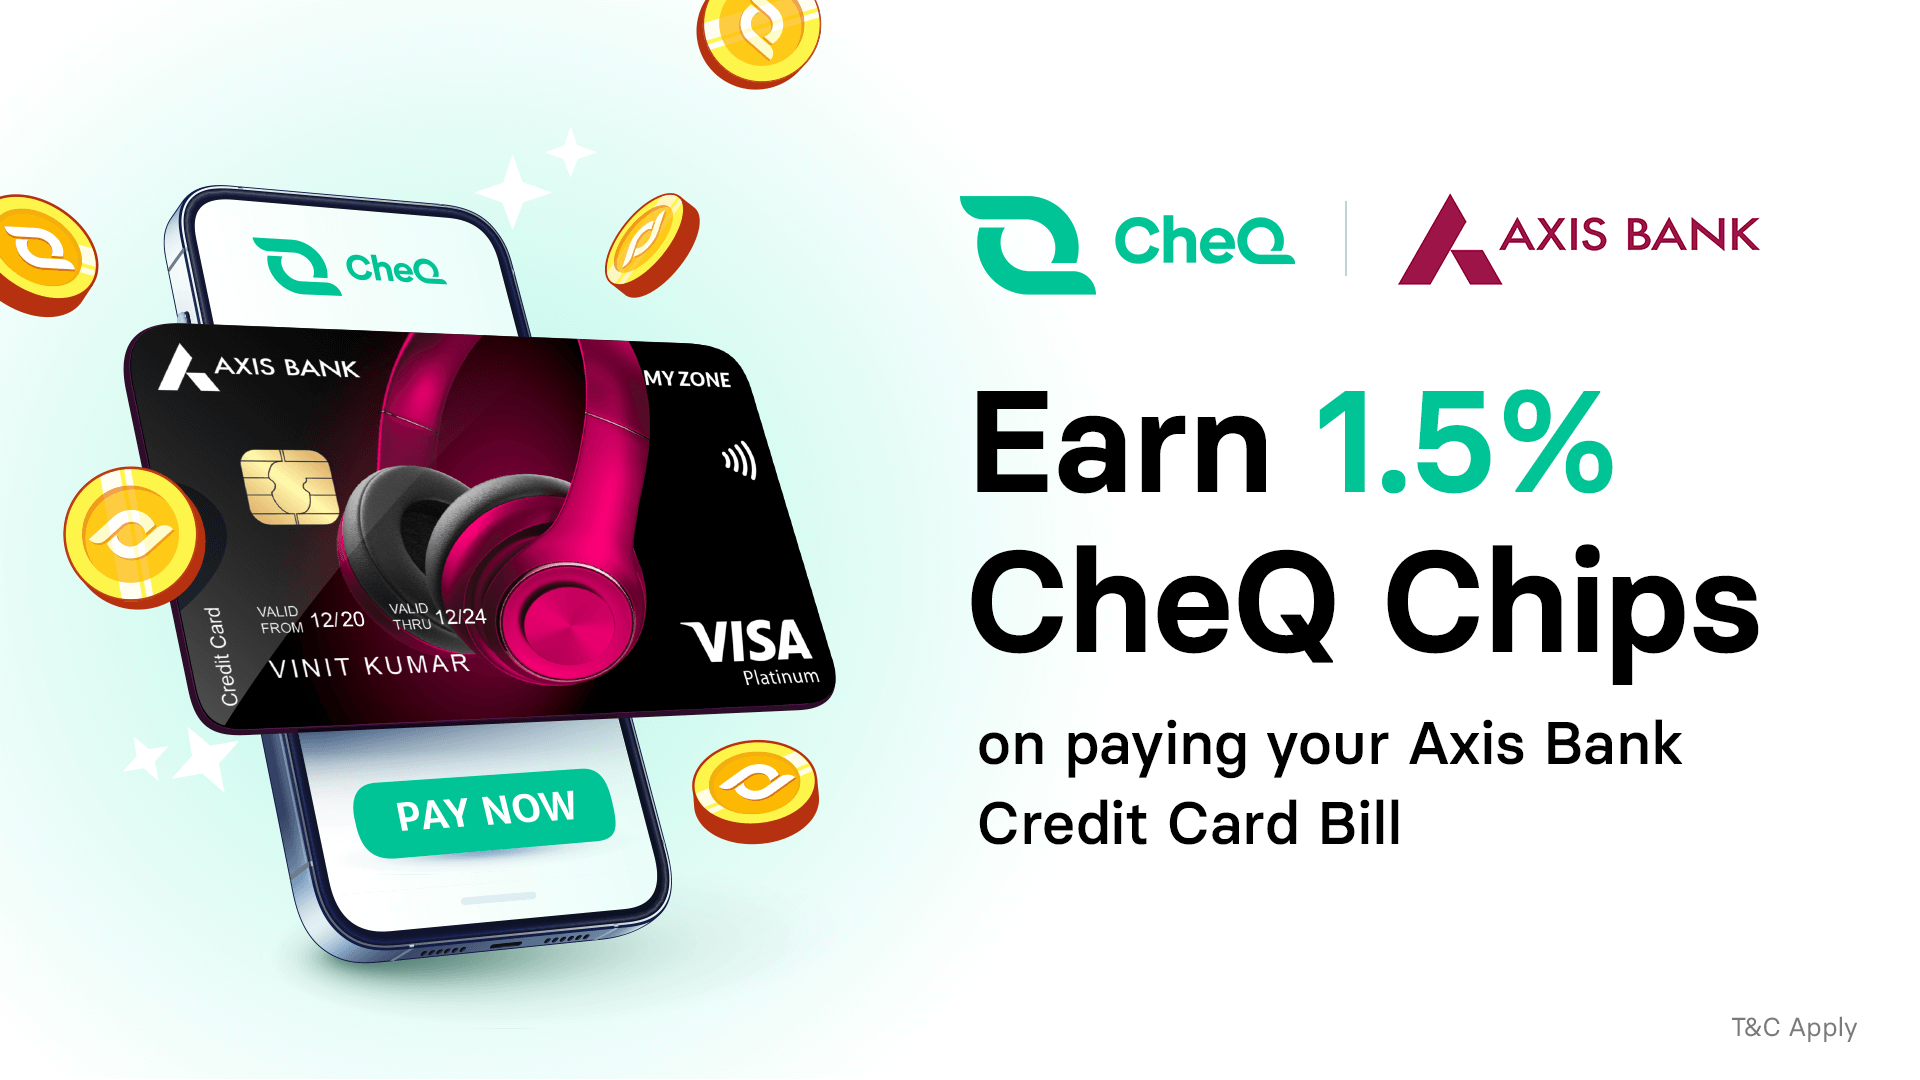 CheQ Partners with Axis Bank to Provide Users with Extra Rewards on Credit Card Bill Payments